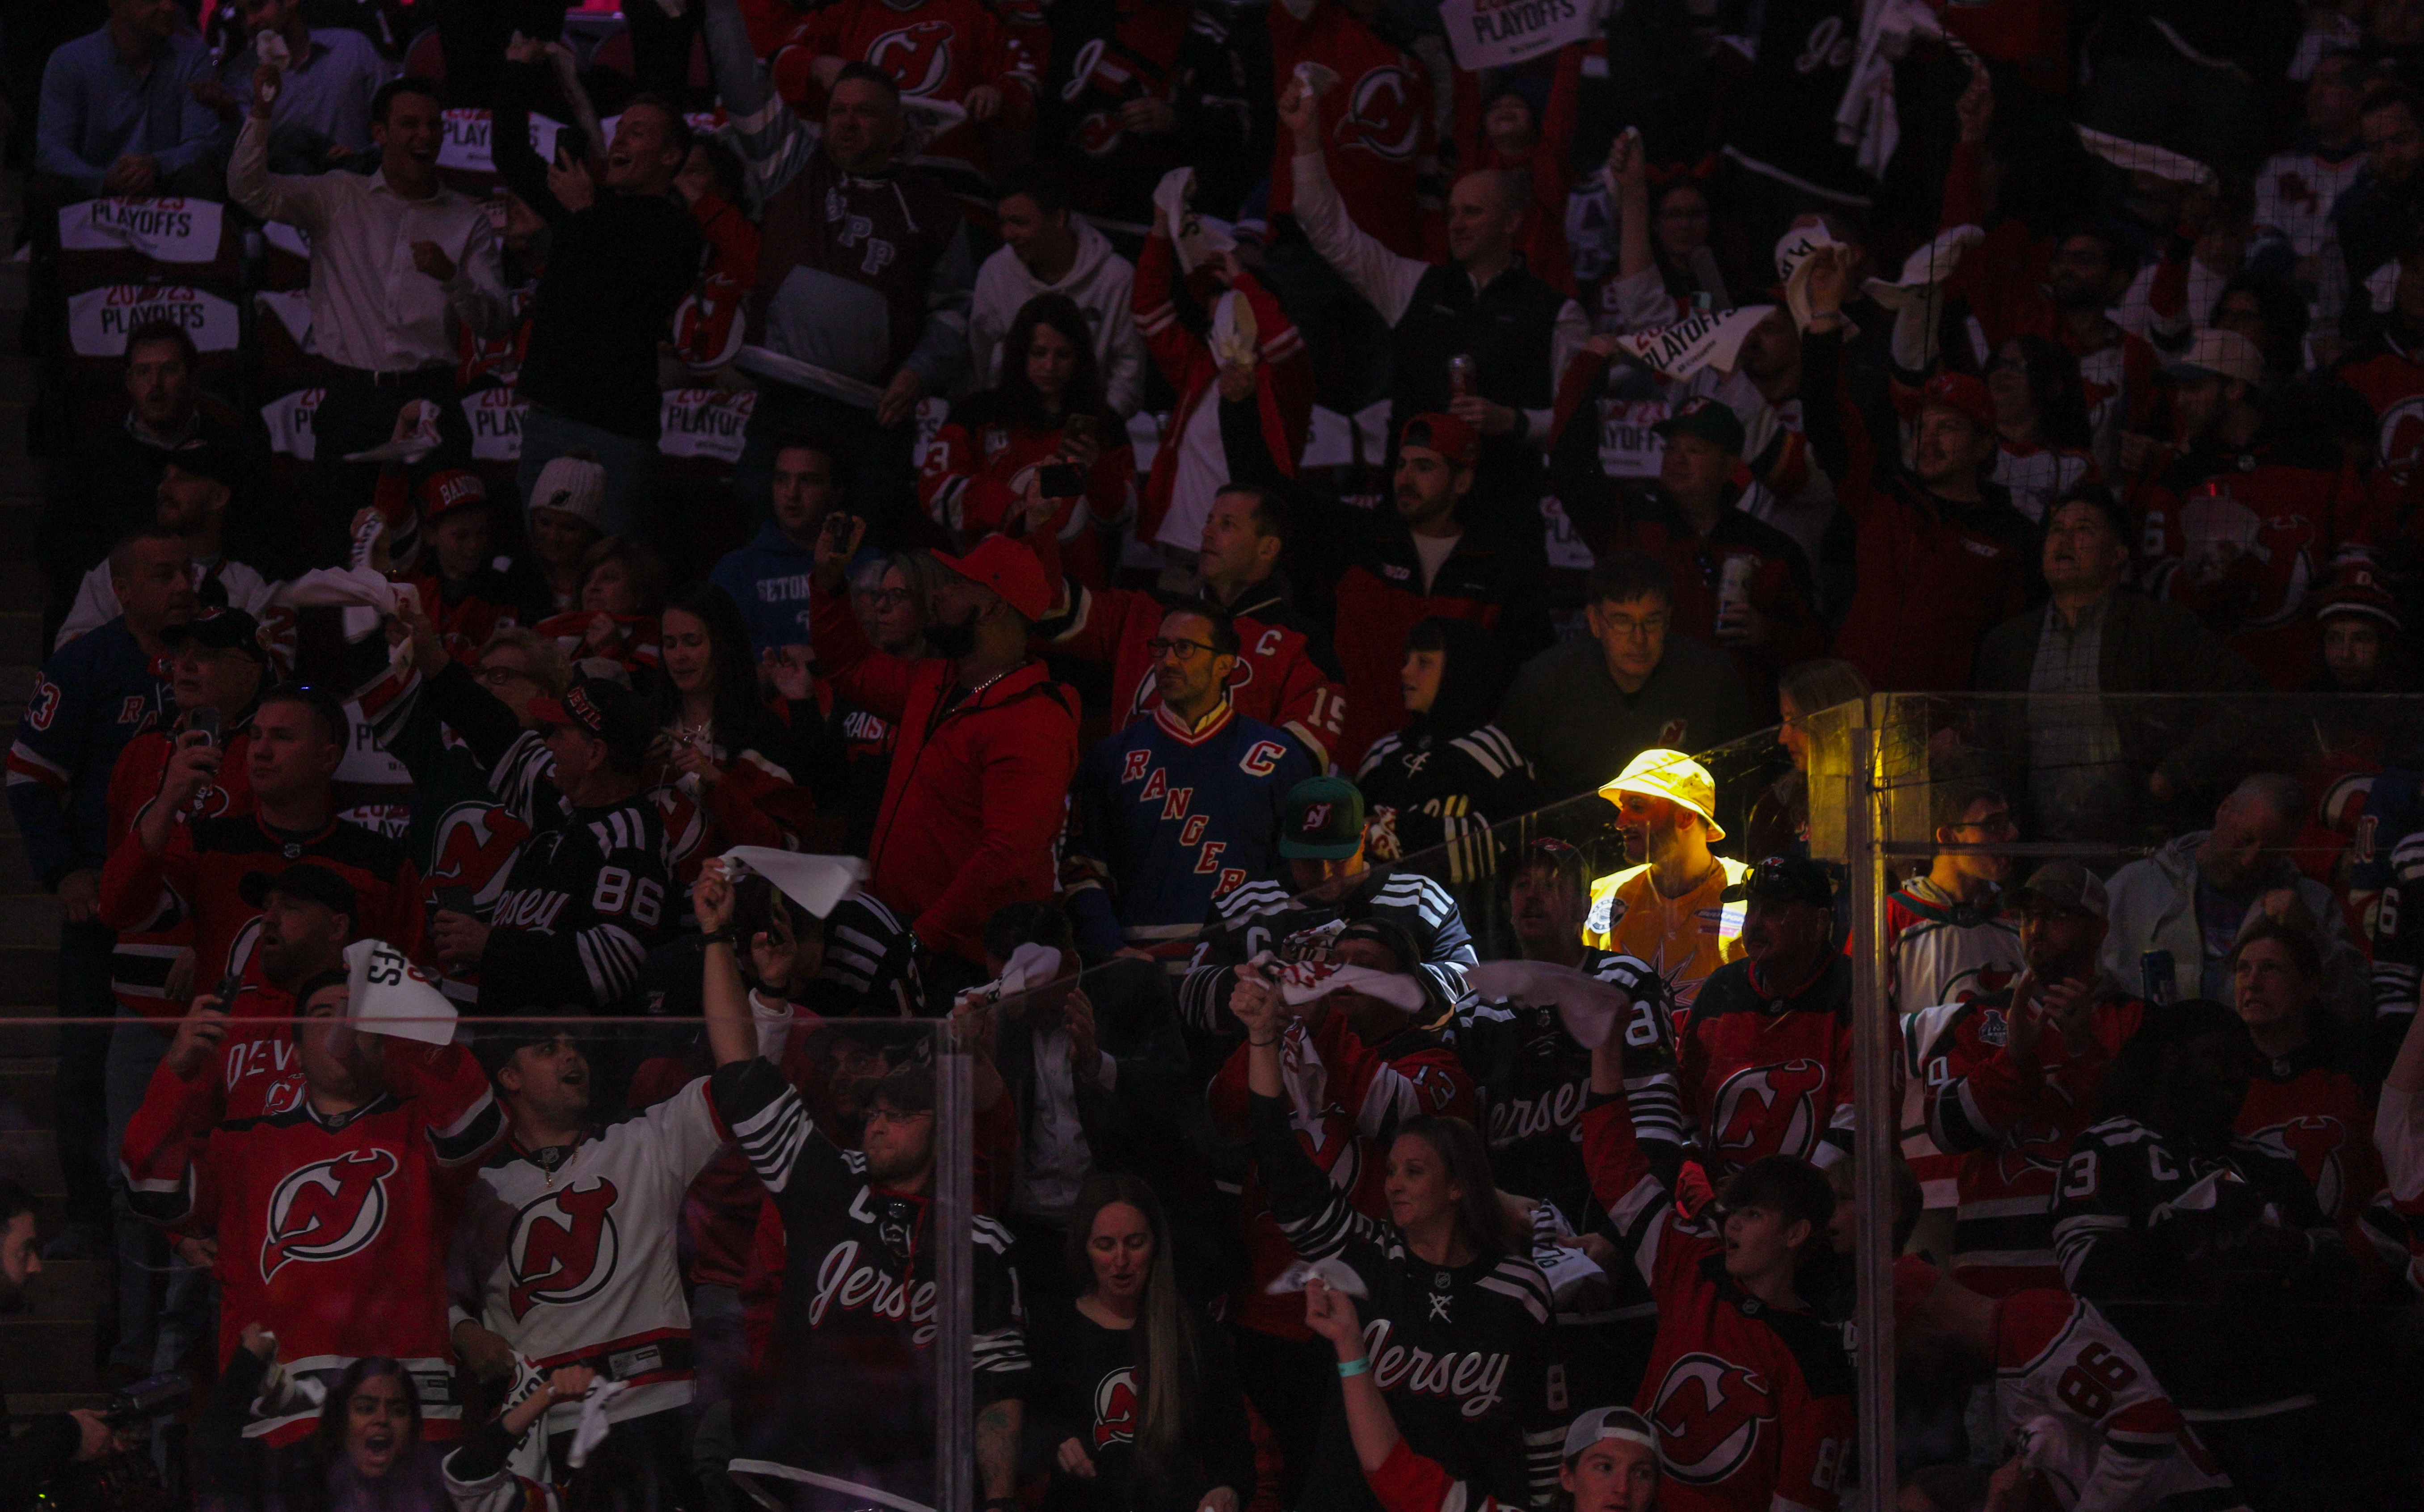 Fans in the lower level of Prudential Center wave towels as they wait for players to take the ice for Game 1 of the Stanley Cup playoffs series between the New Jersey Devils and the New York Rangers on Tuesday, April 18, 2023 in Newark, N.J. 